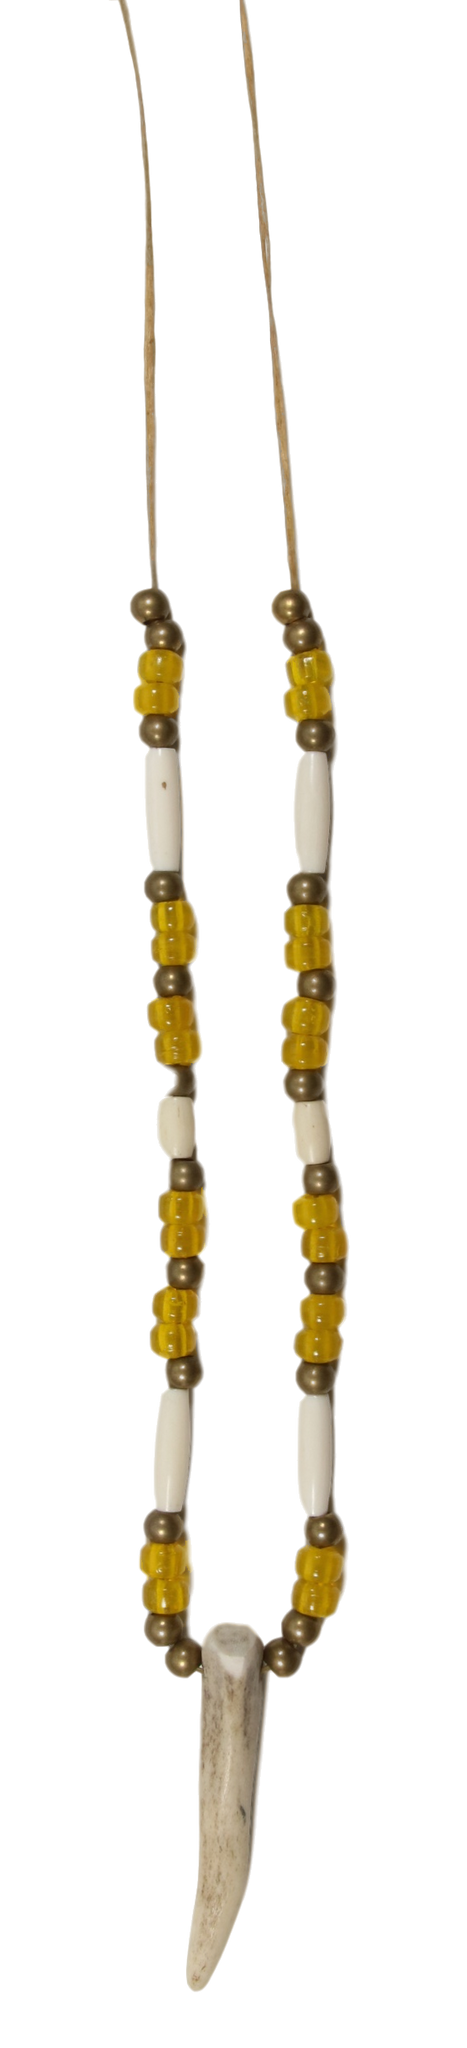 Necklace Deer Antler with Bone and Yellow Glass Beads